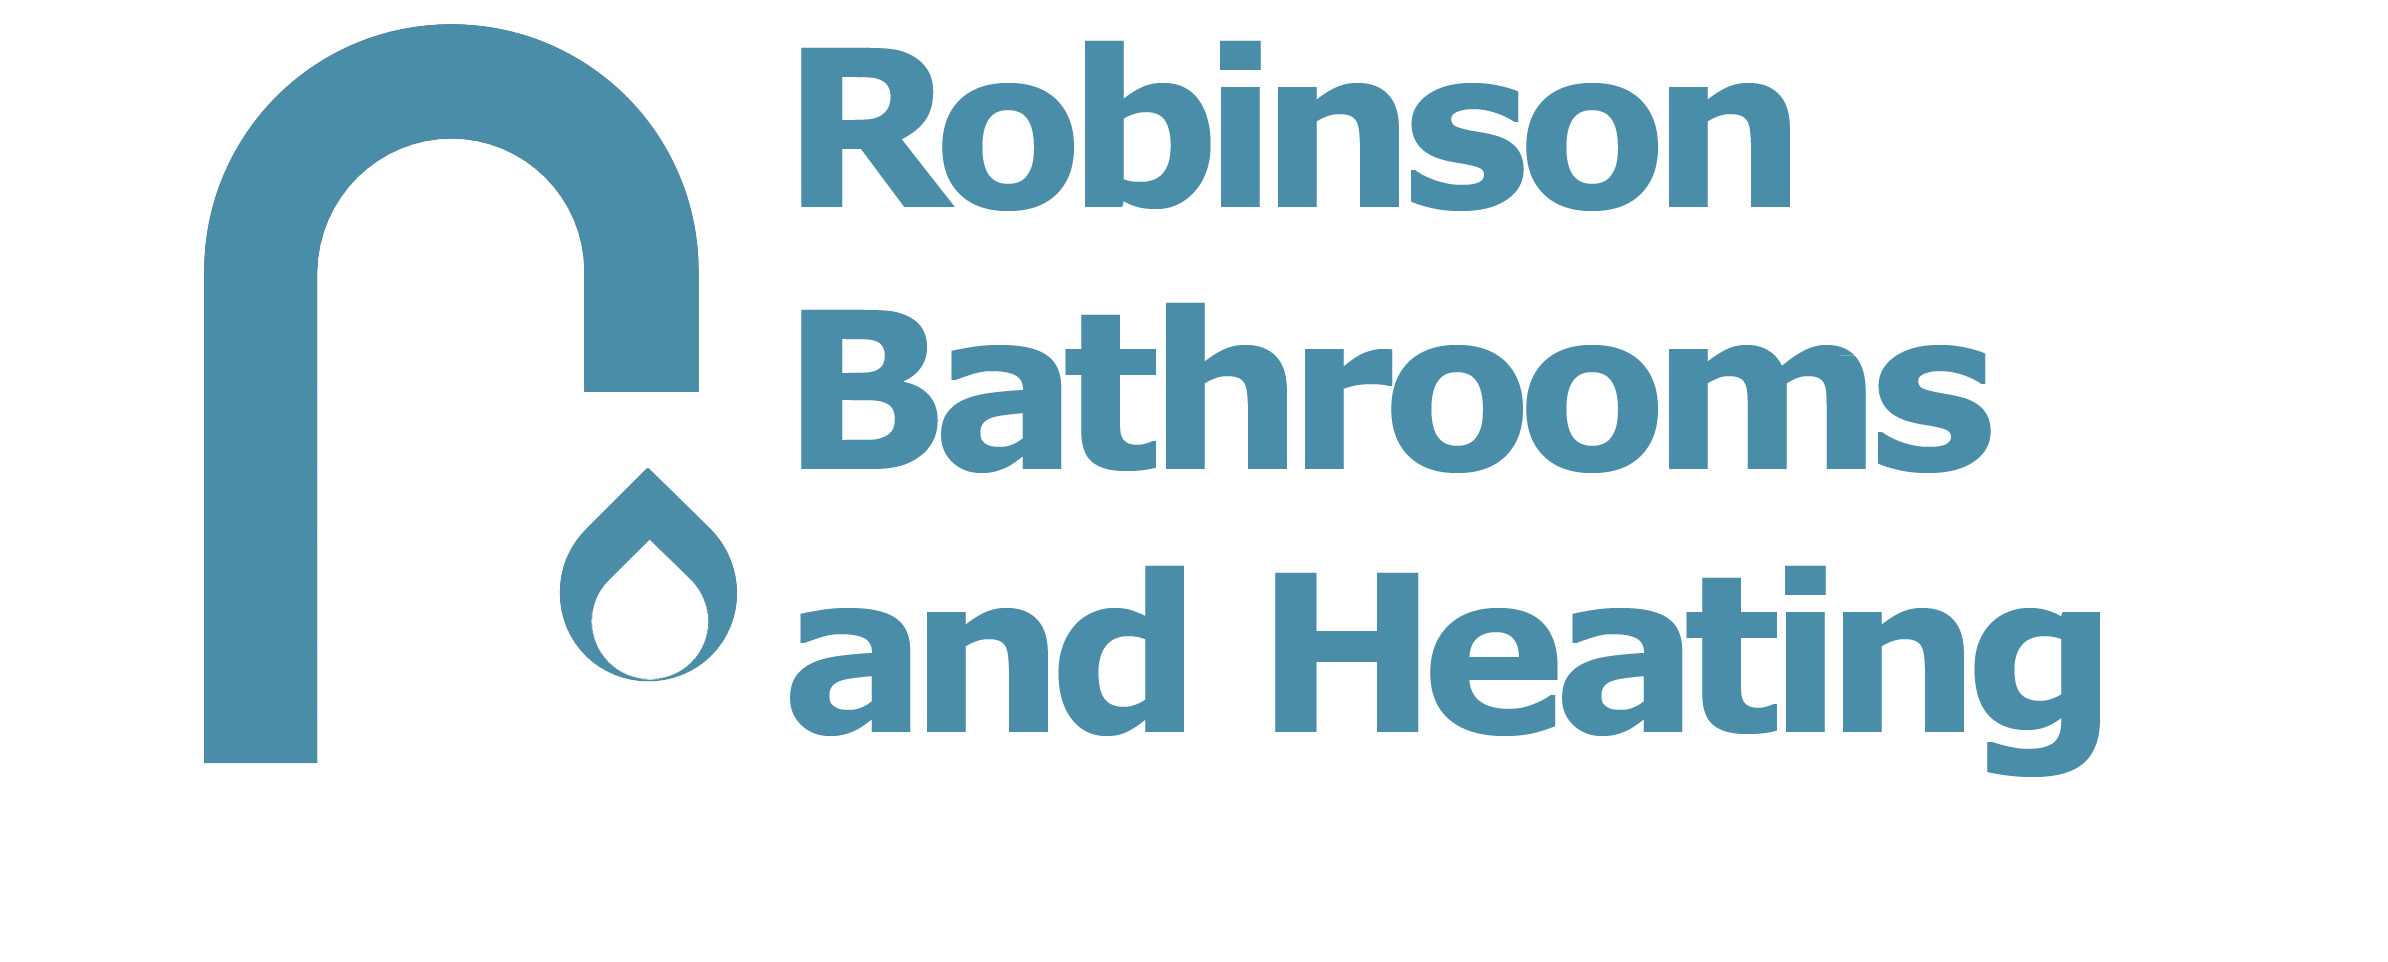 Robinsons Bathrooms and Heating